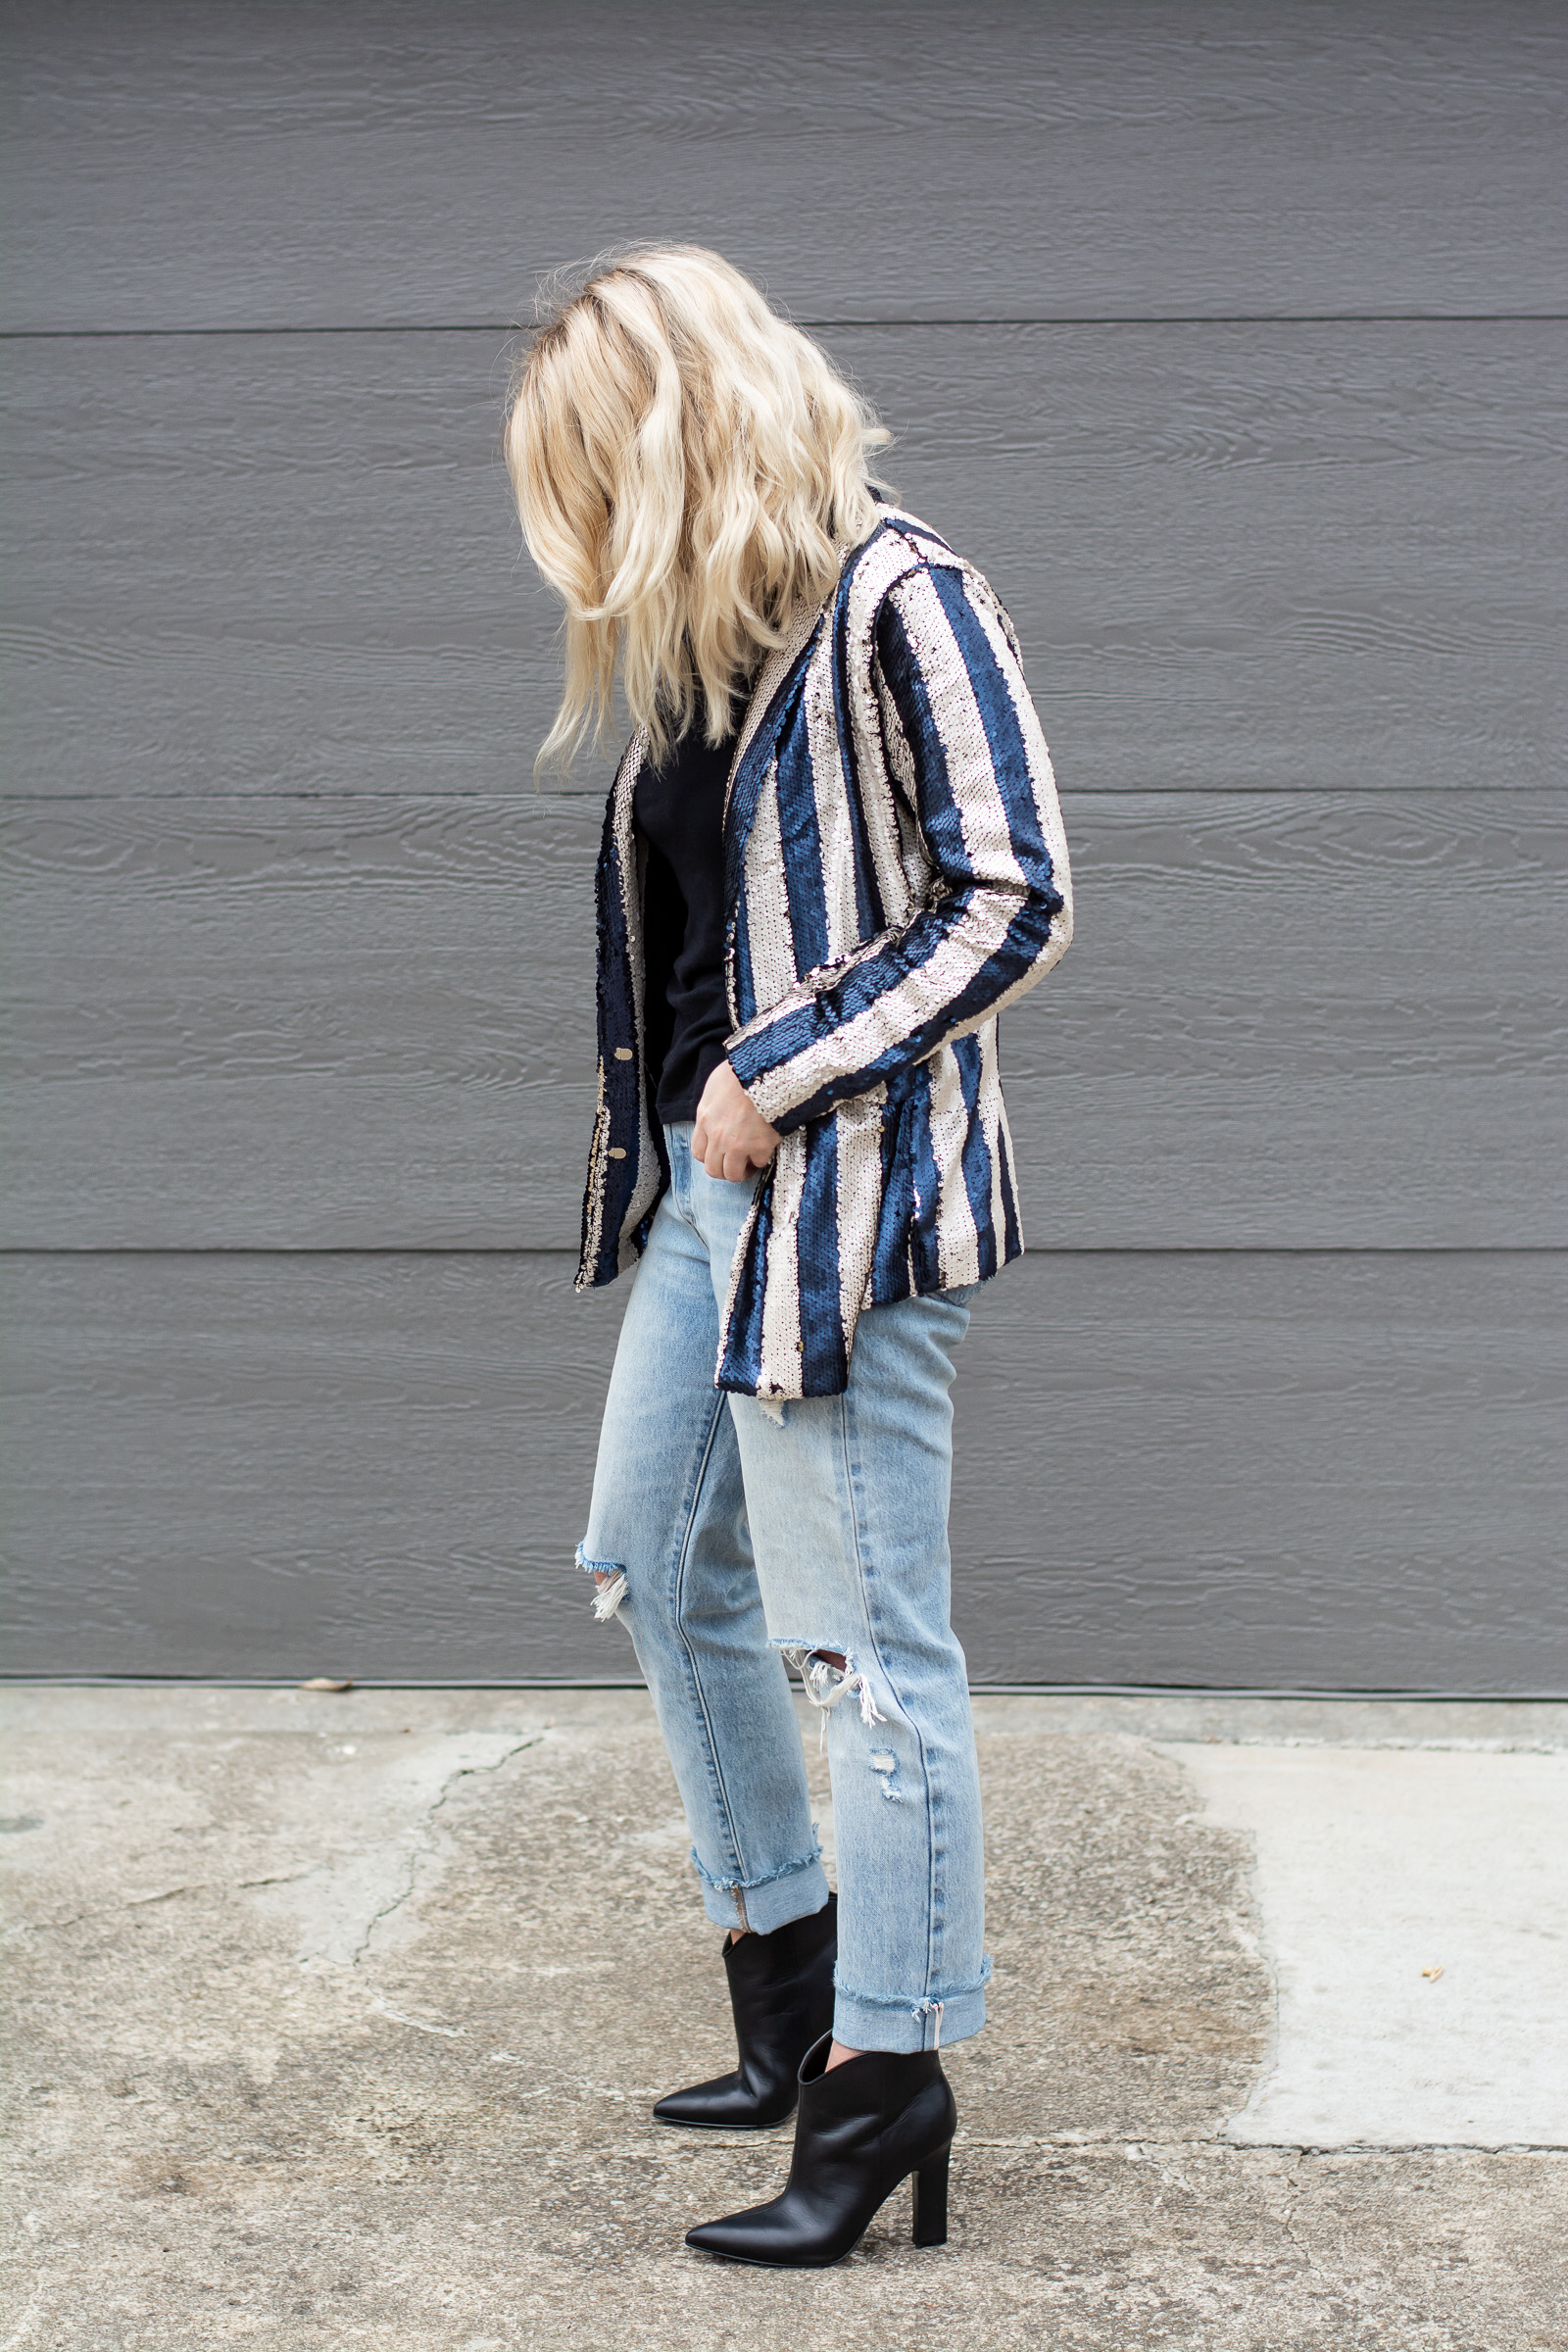 Sequin Striped Blazer for Day. | Ash from LSR